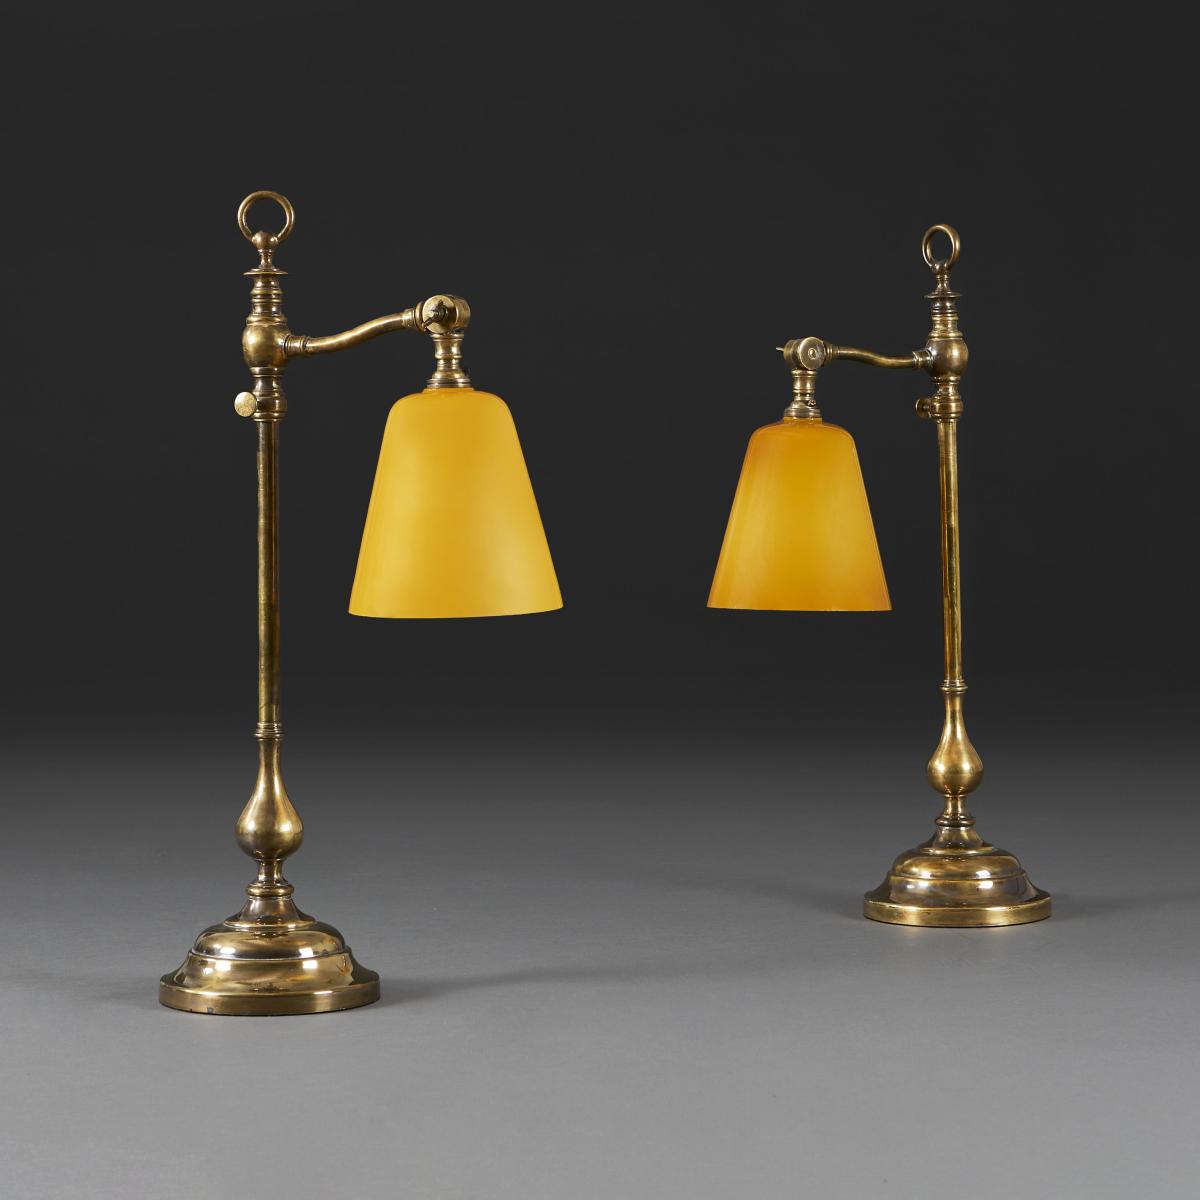 A Pair of Mid 19th Century Brass Student Lamps